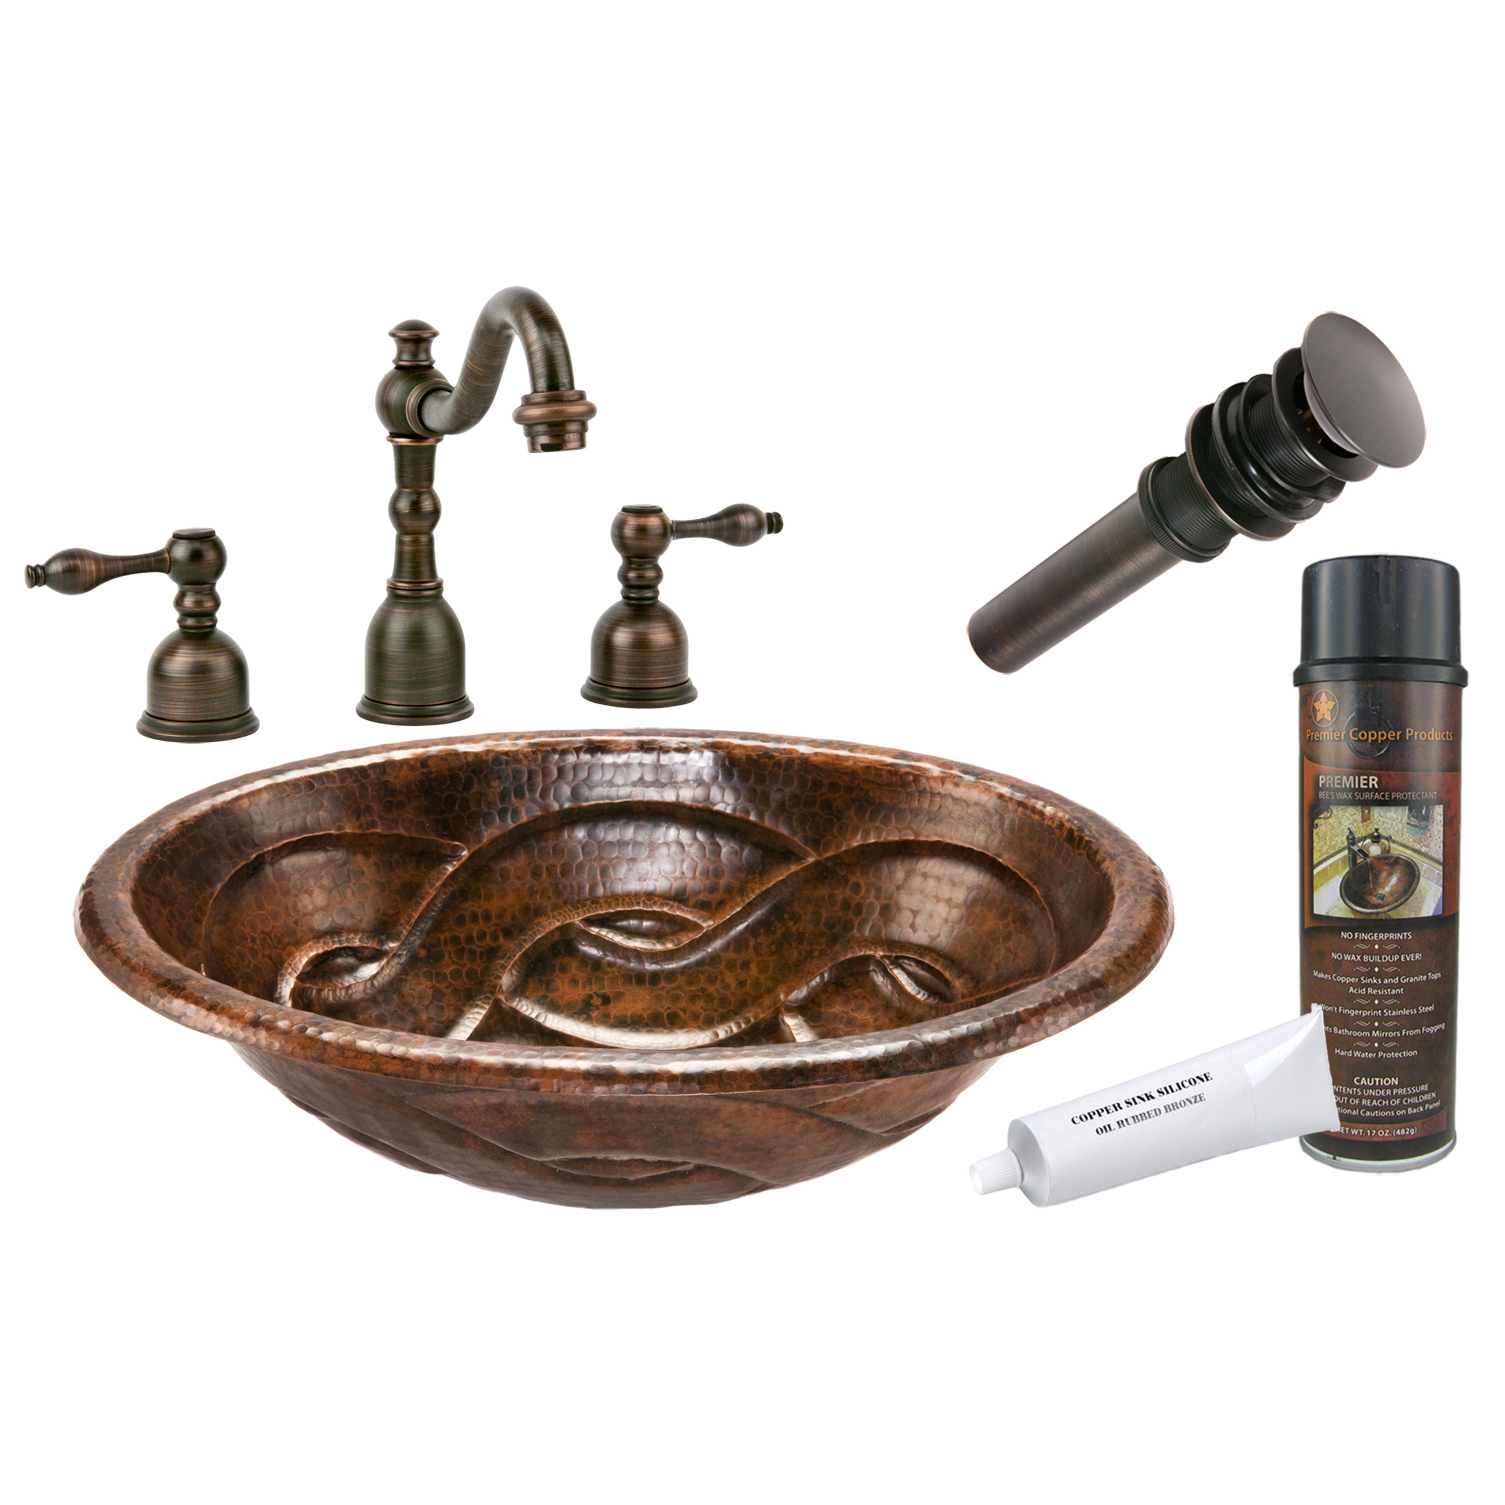 Oval Braid Self Rimming Hammered Copper Sink, Faucet And Accessories Package, Oil Rubbed Bronze